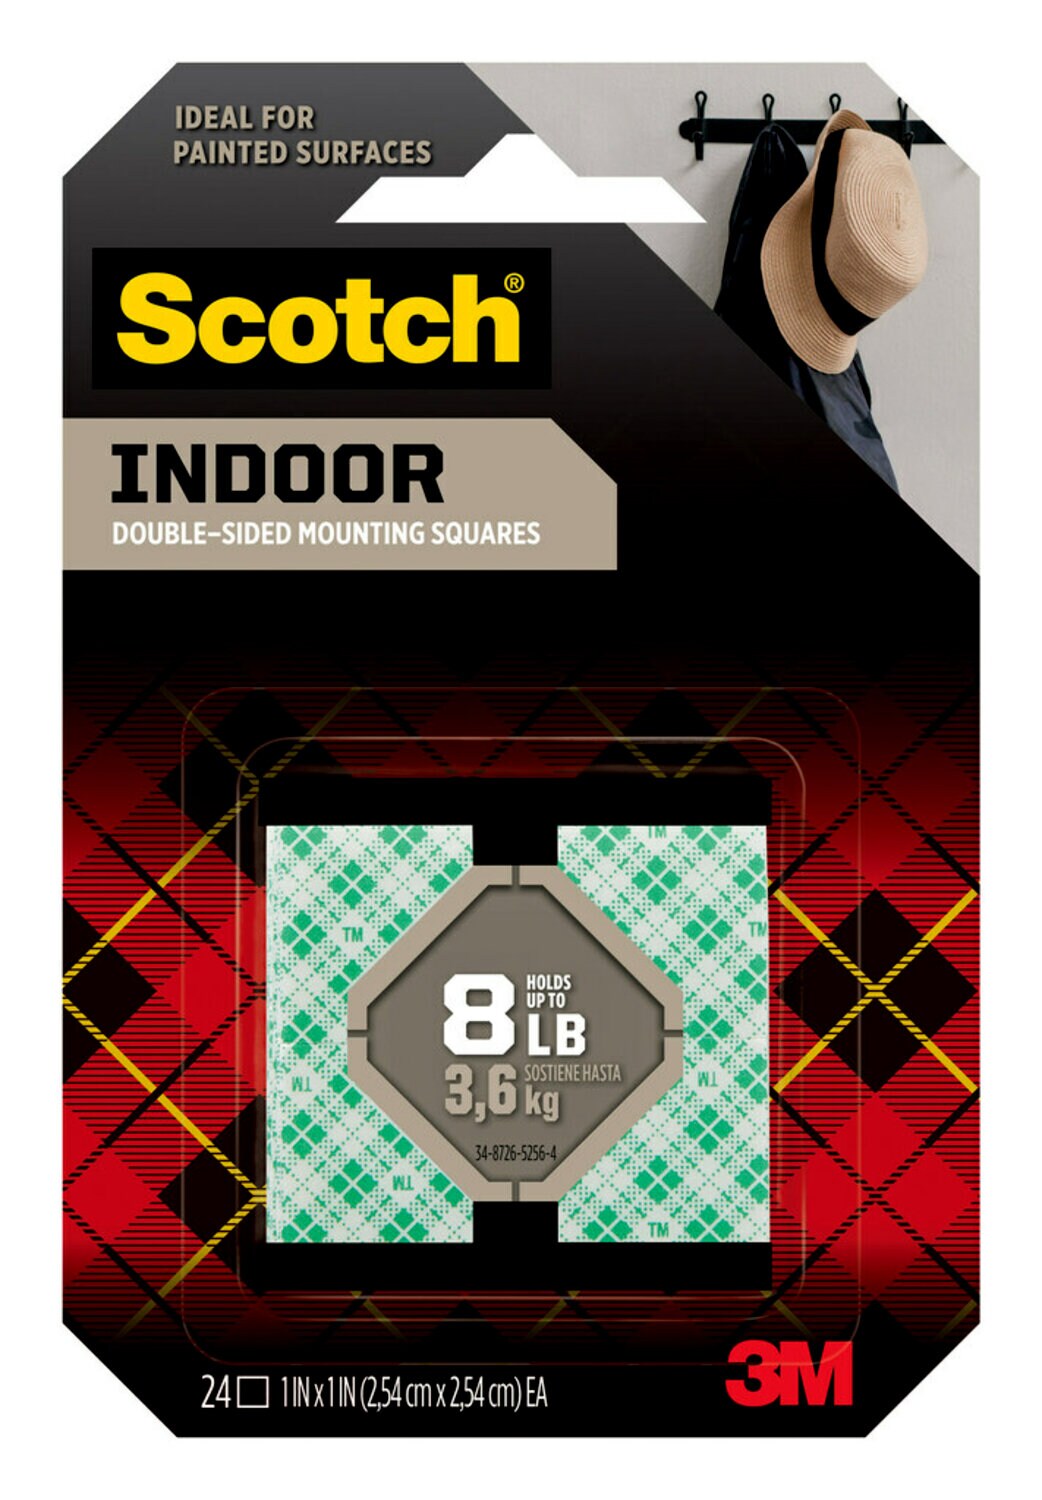 7100241752 - Scotch Indoor Double-Sided Mounting Squares 111S-SQ-24, 1 in x 1 in (2.54 cm x 2.54 cm) 24/pk